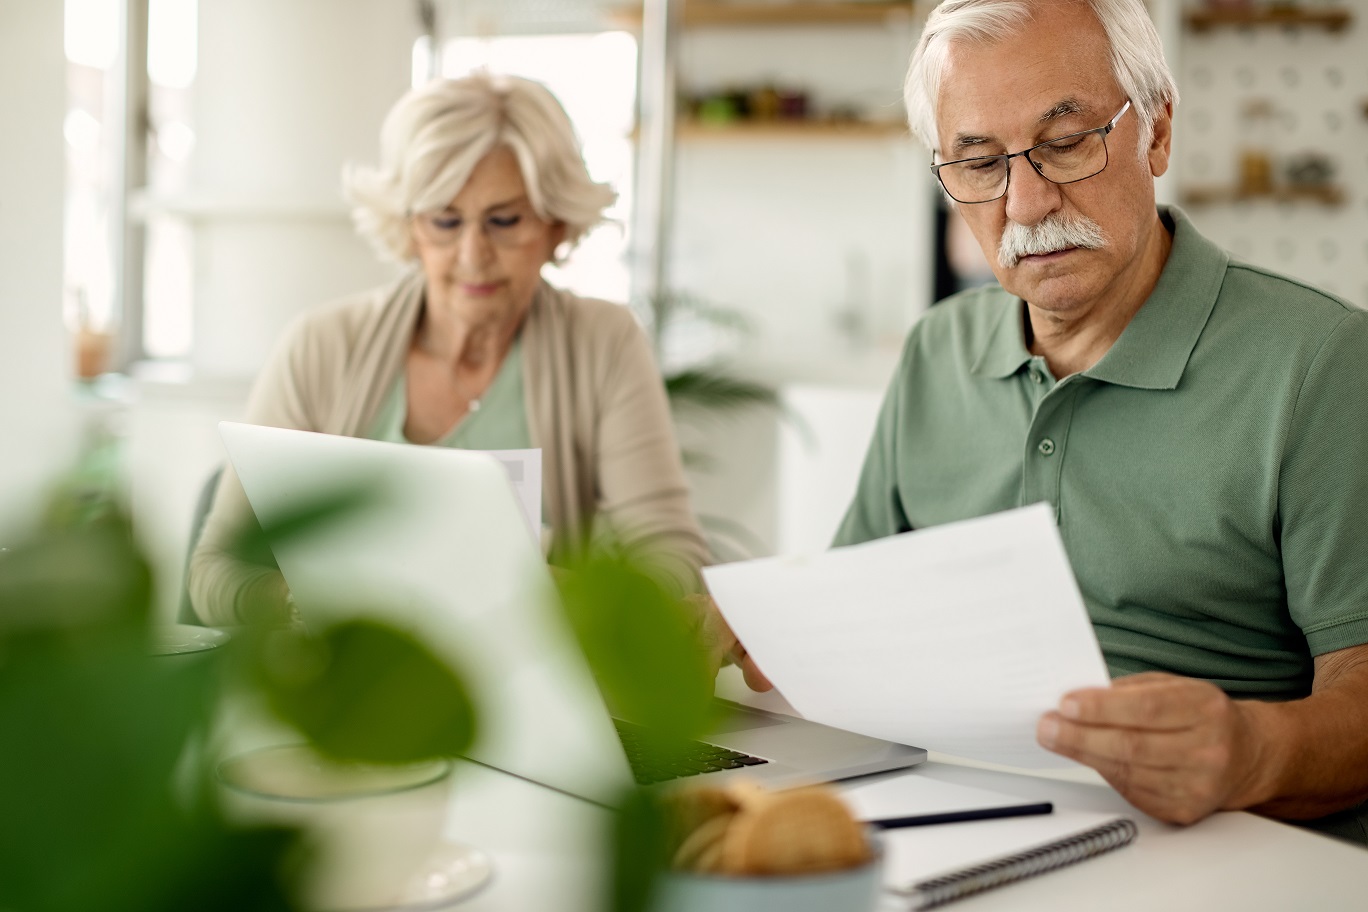 When Should You Update Your Will?